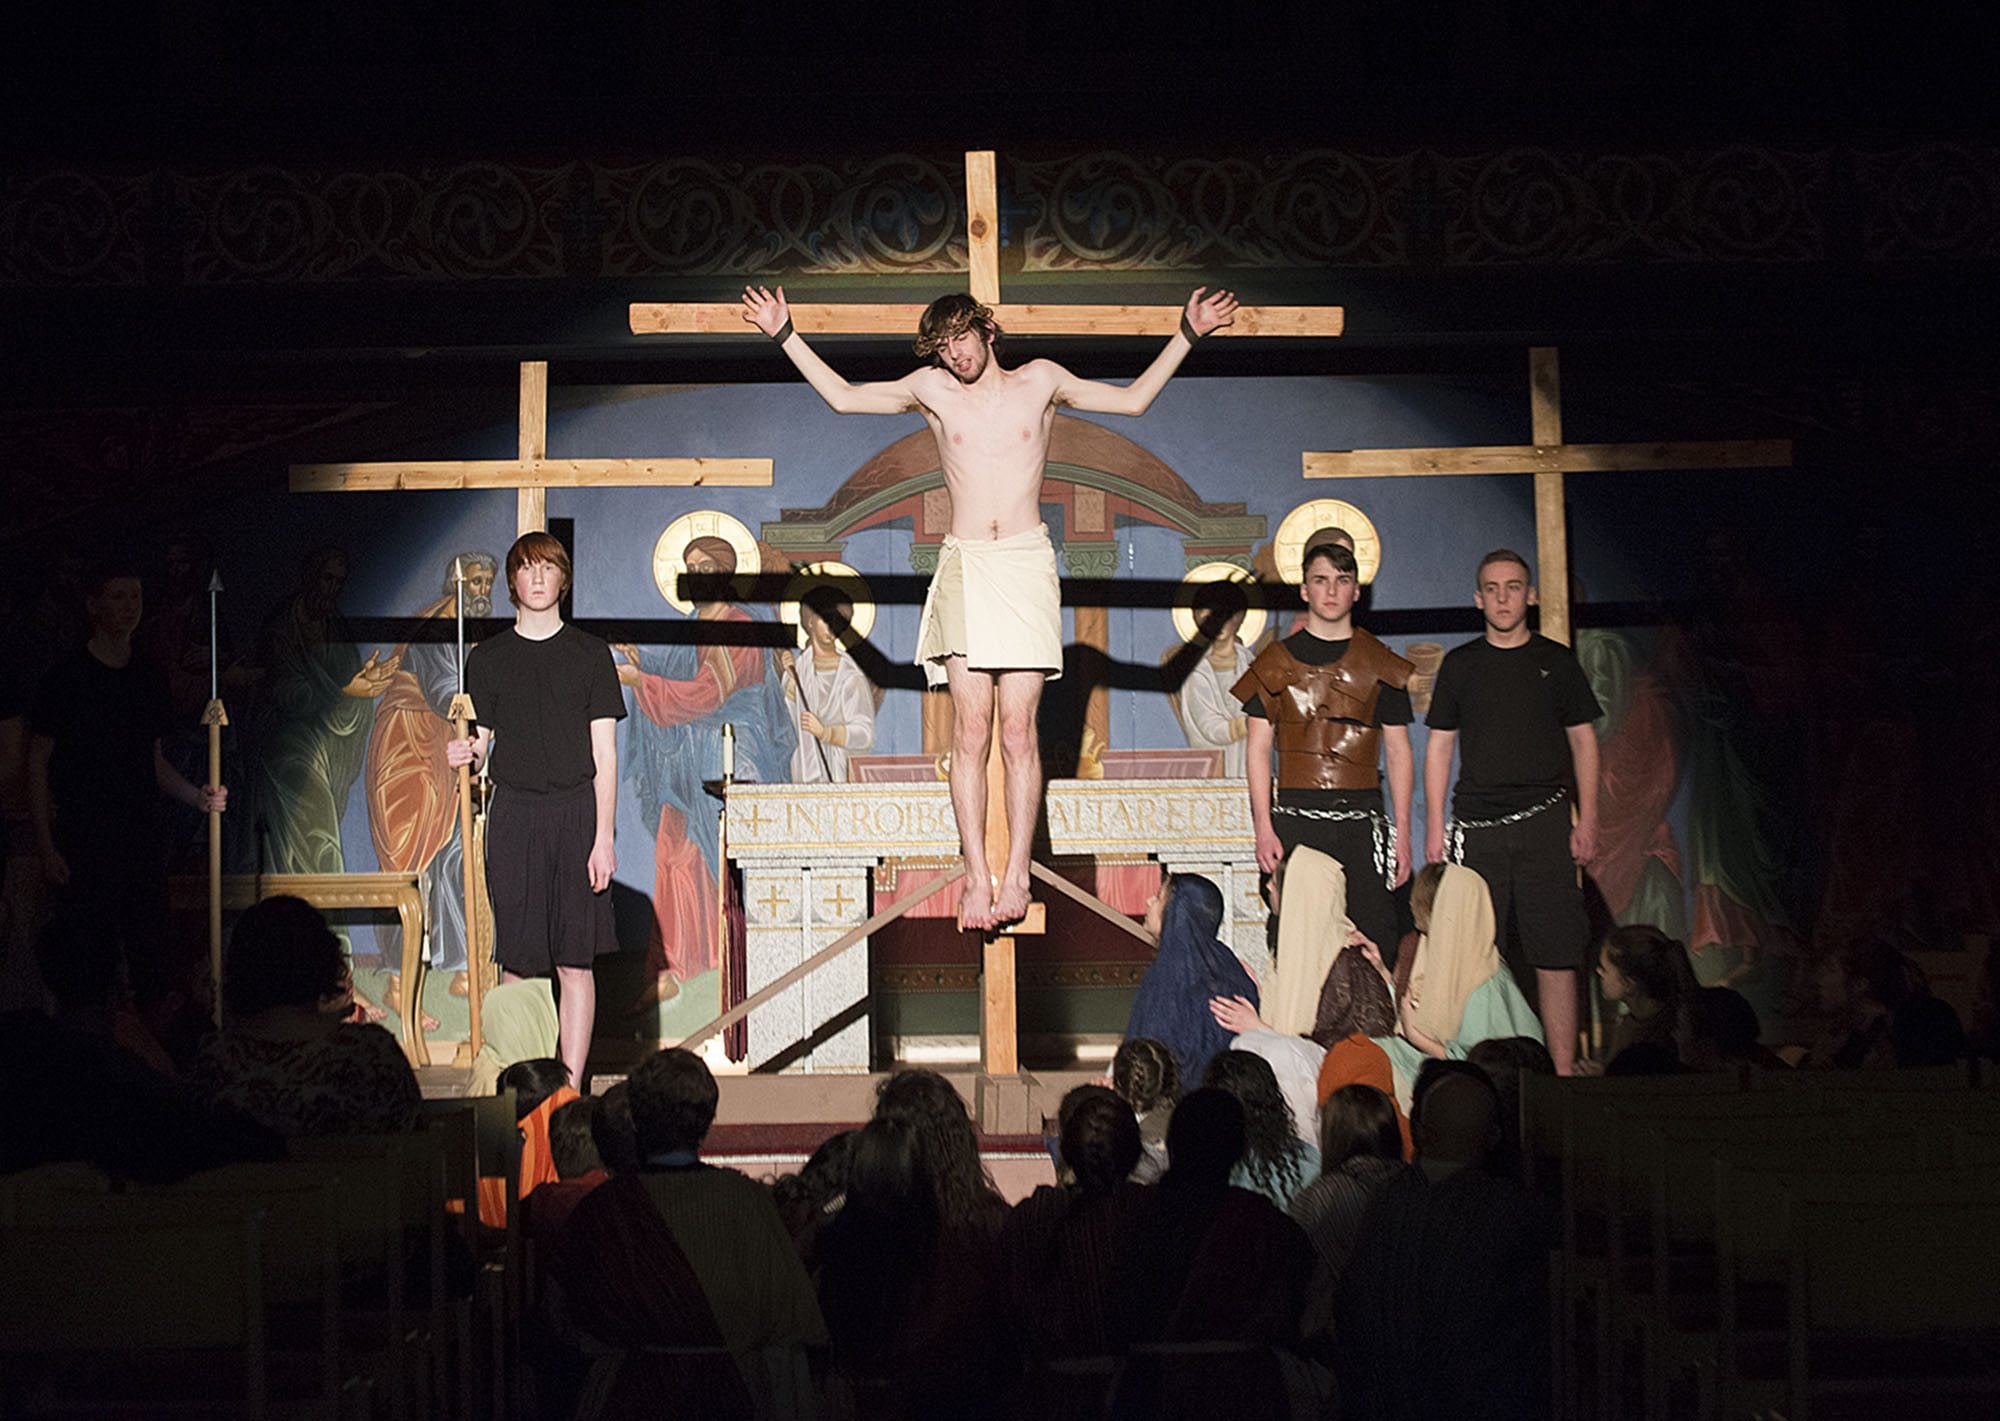 Station #12 (Jesus dies on the cross) is acted out Friday night, March 18, 2016 at St. Joseph Catholic Church. Jesus, center, is played by Avery Standridge.